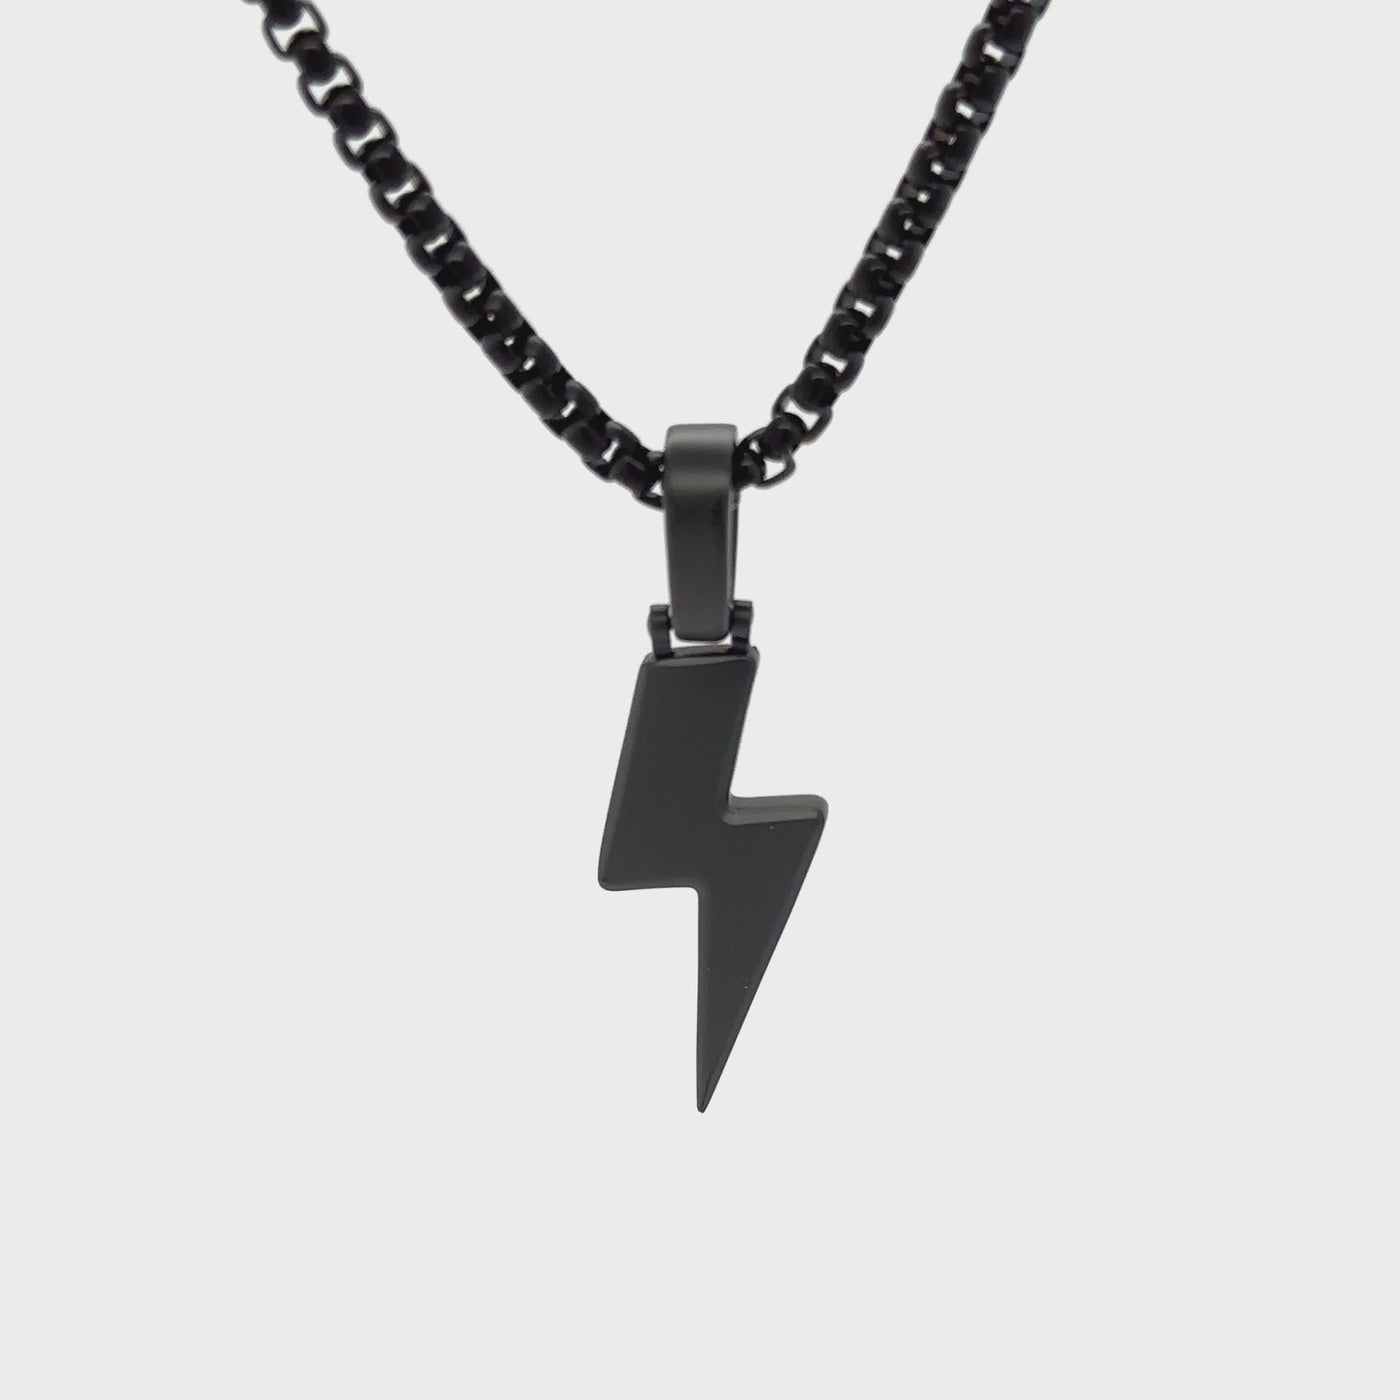 Charm Thunder Lightning Bolt Gold Silver Plated Stainless Steel Chain  Necklaces | eBay